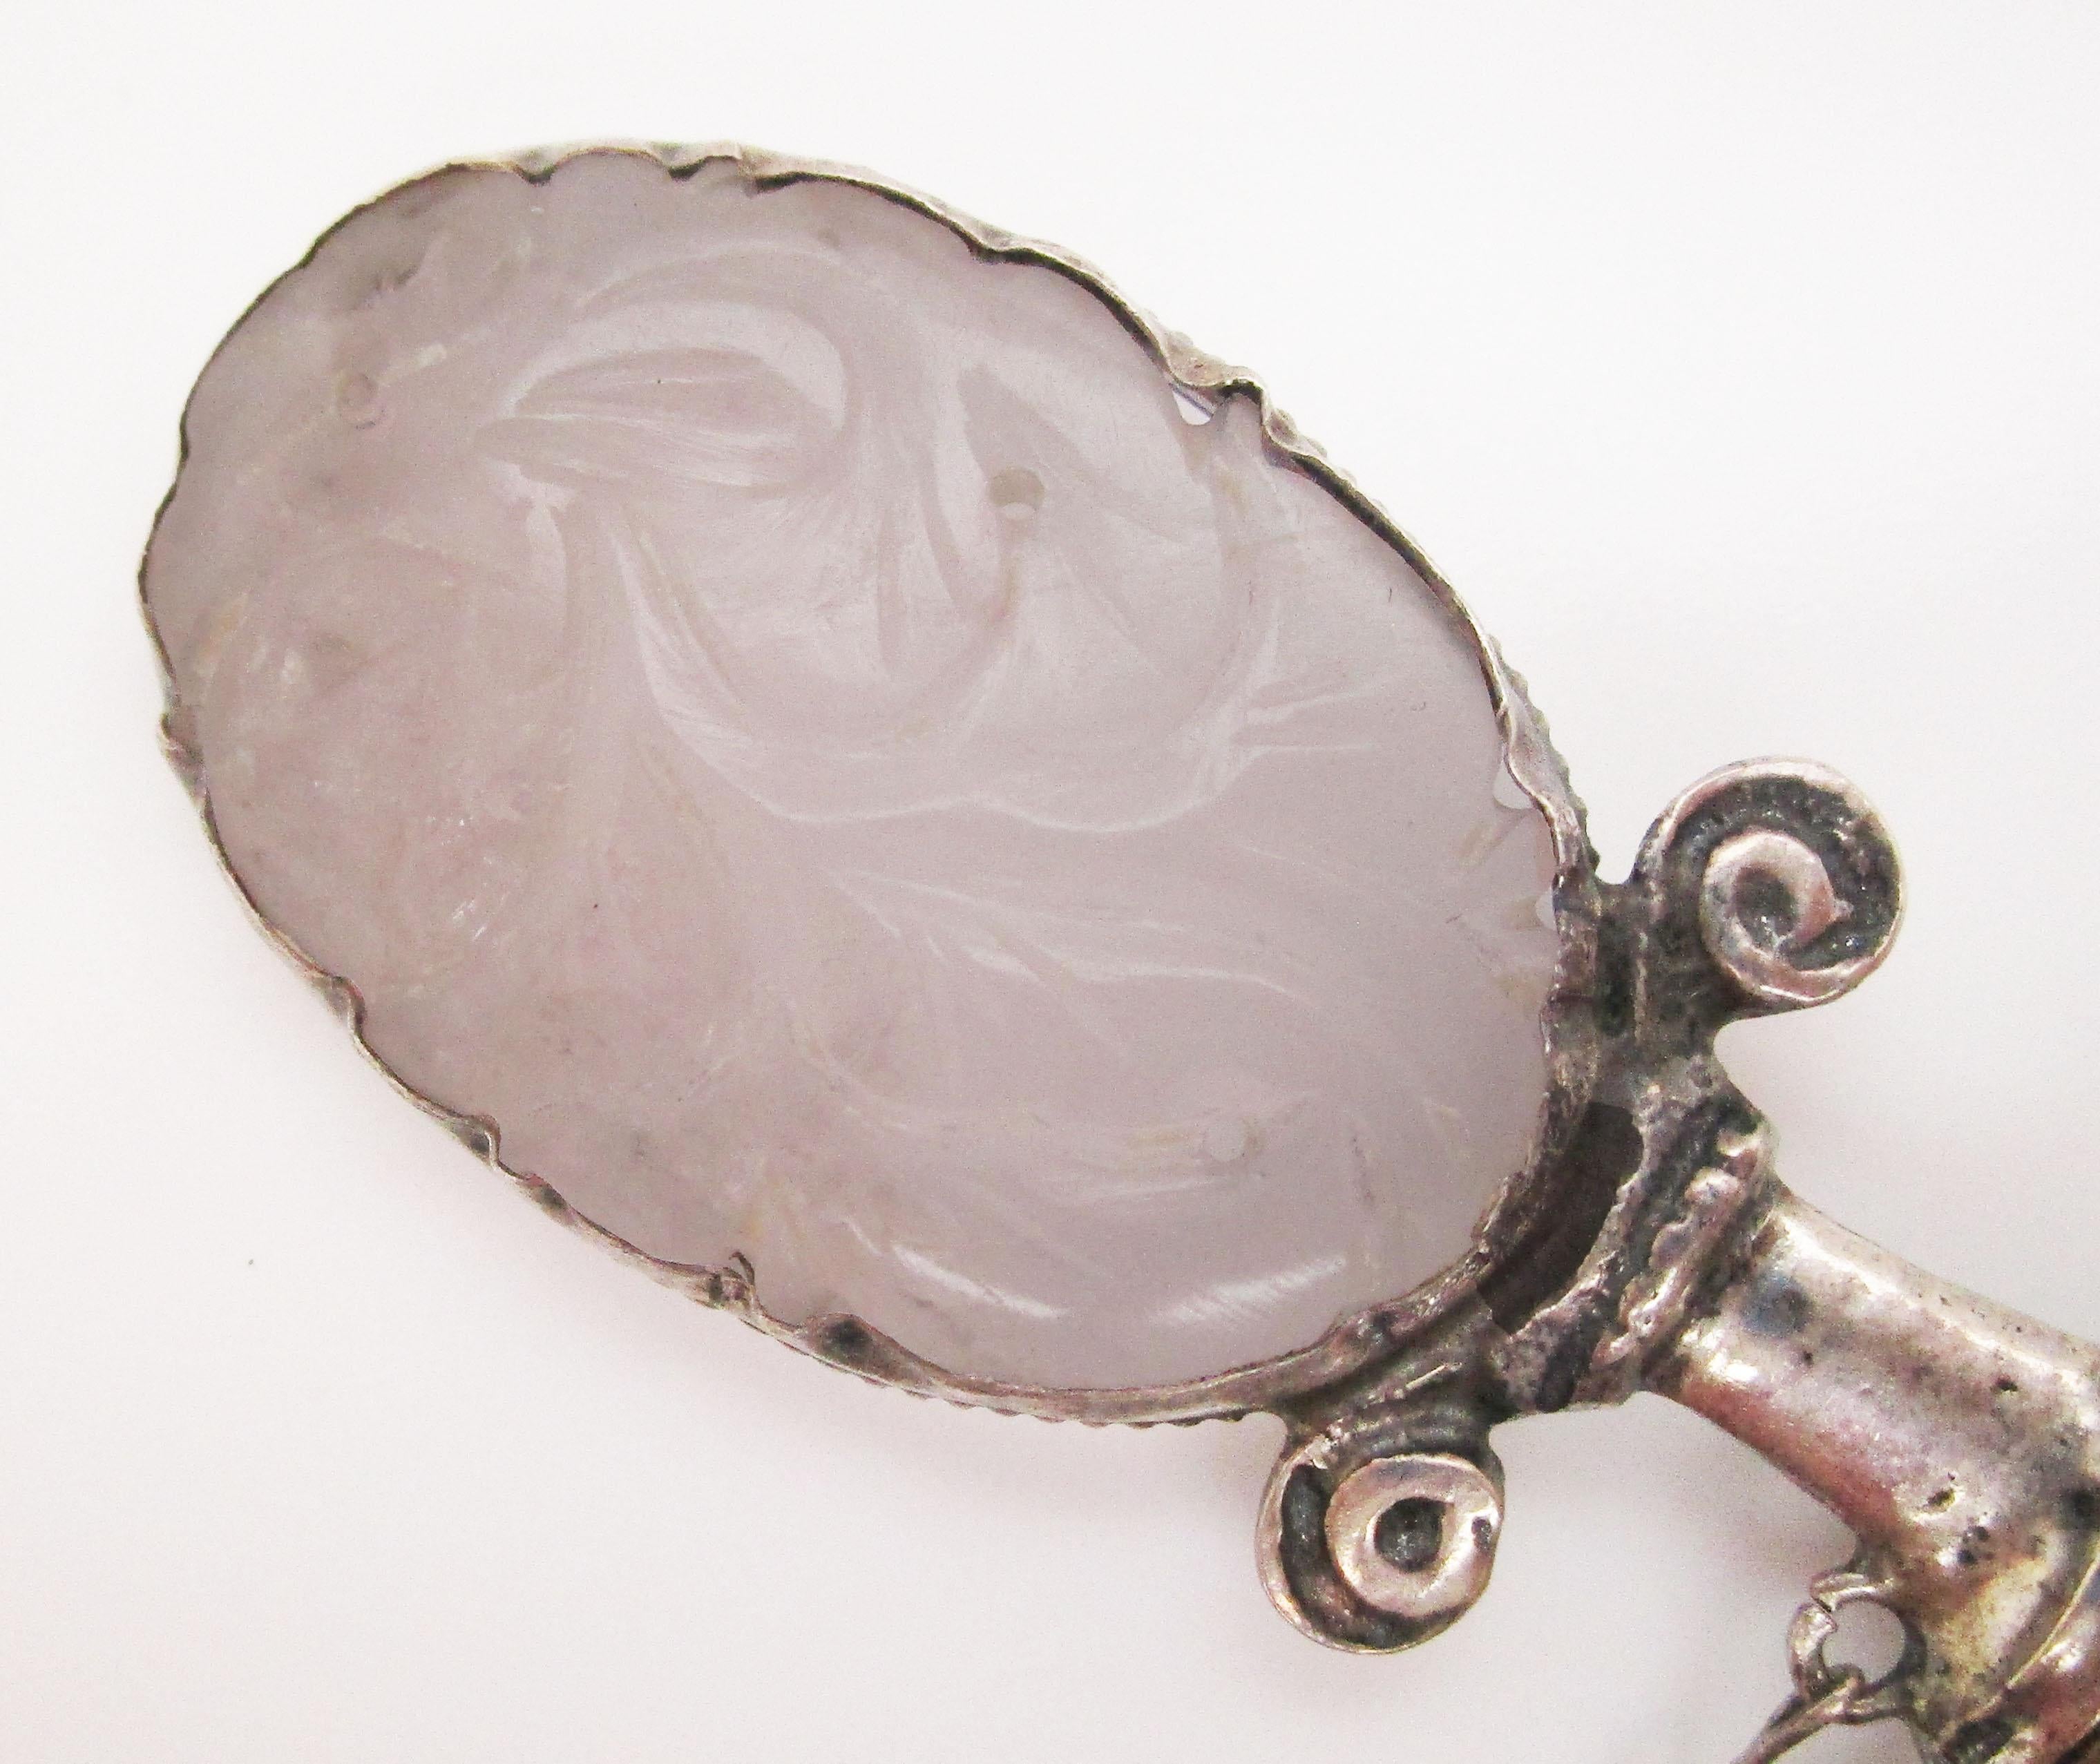 This sterling silver brooch brings together an epic combination of carved rose quartz and onyx to create an incredible piece of wearable art unlike anything you have seen! The sterling silver has been fashioned into the shape of a miniature blade,